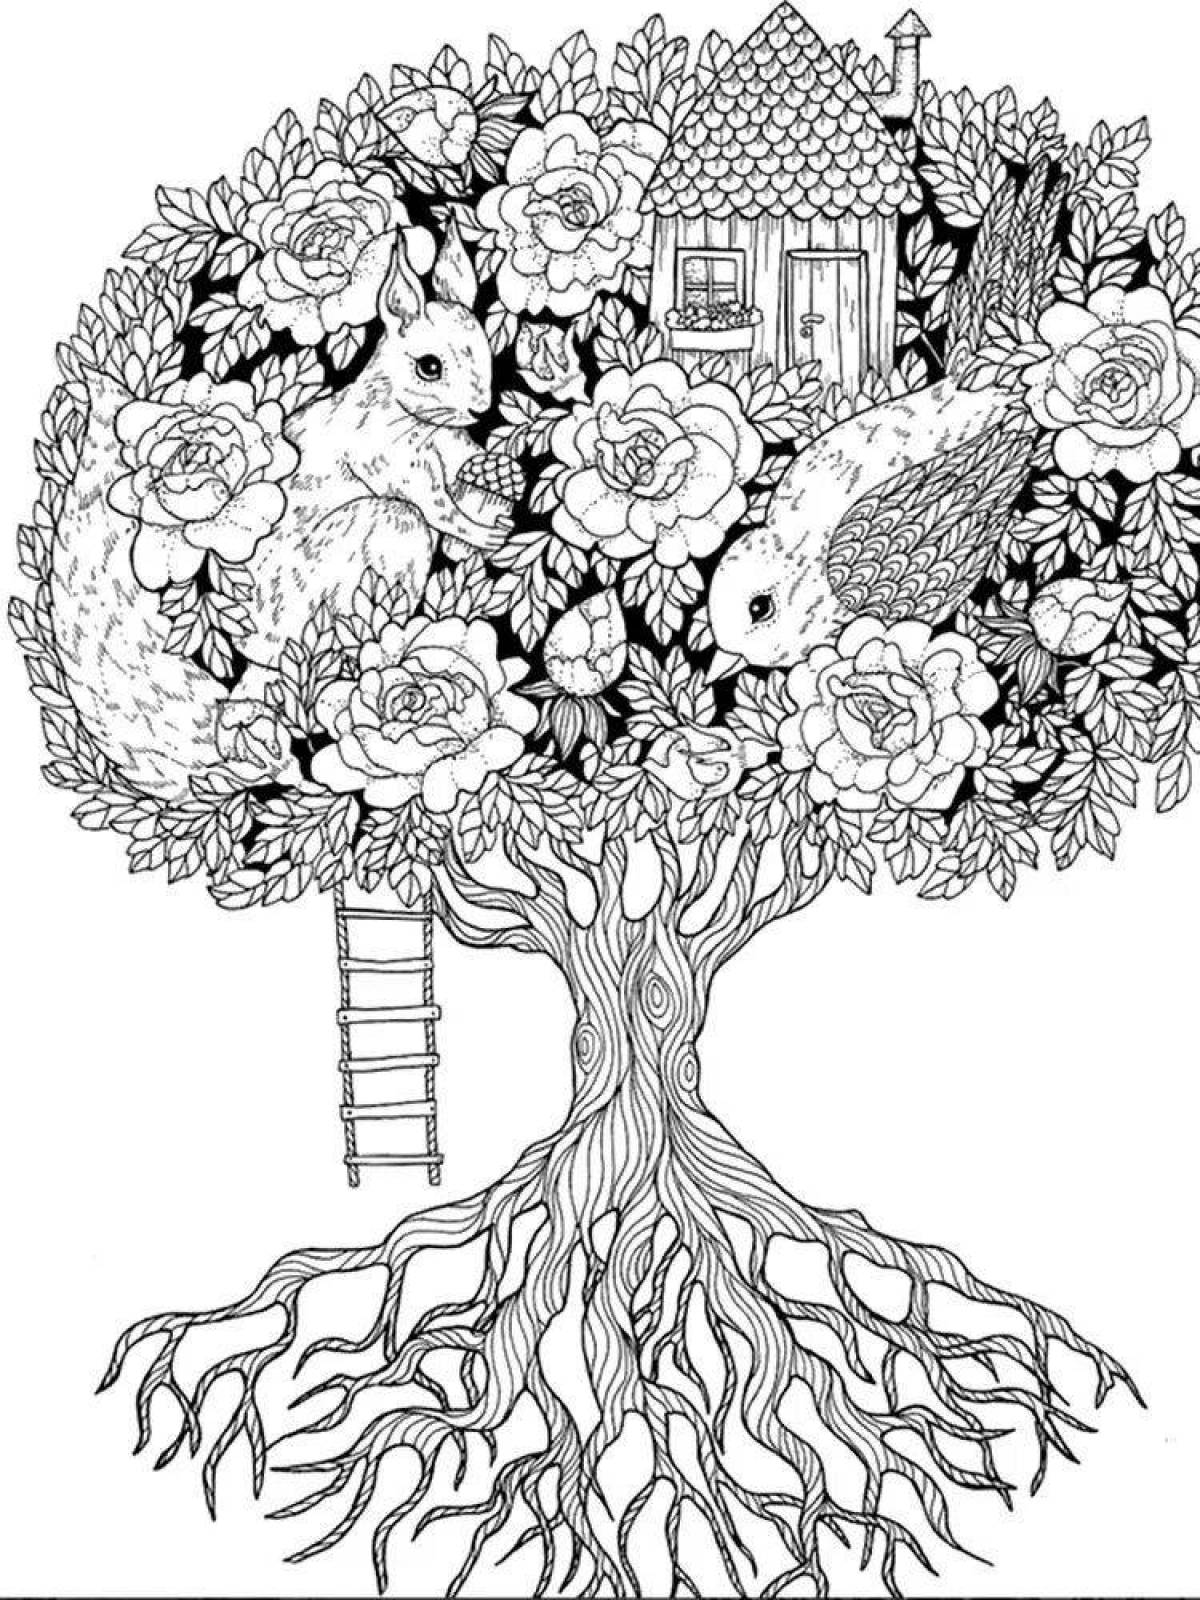 Coloring book shining tree of life